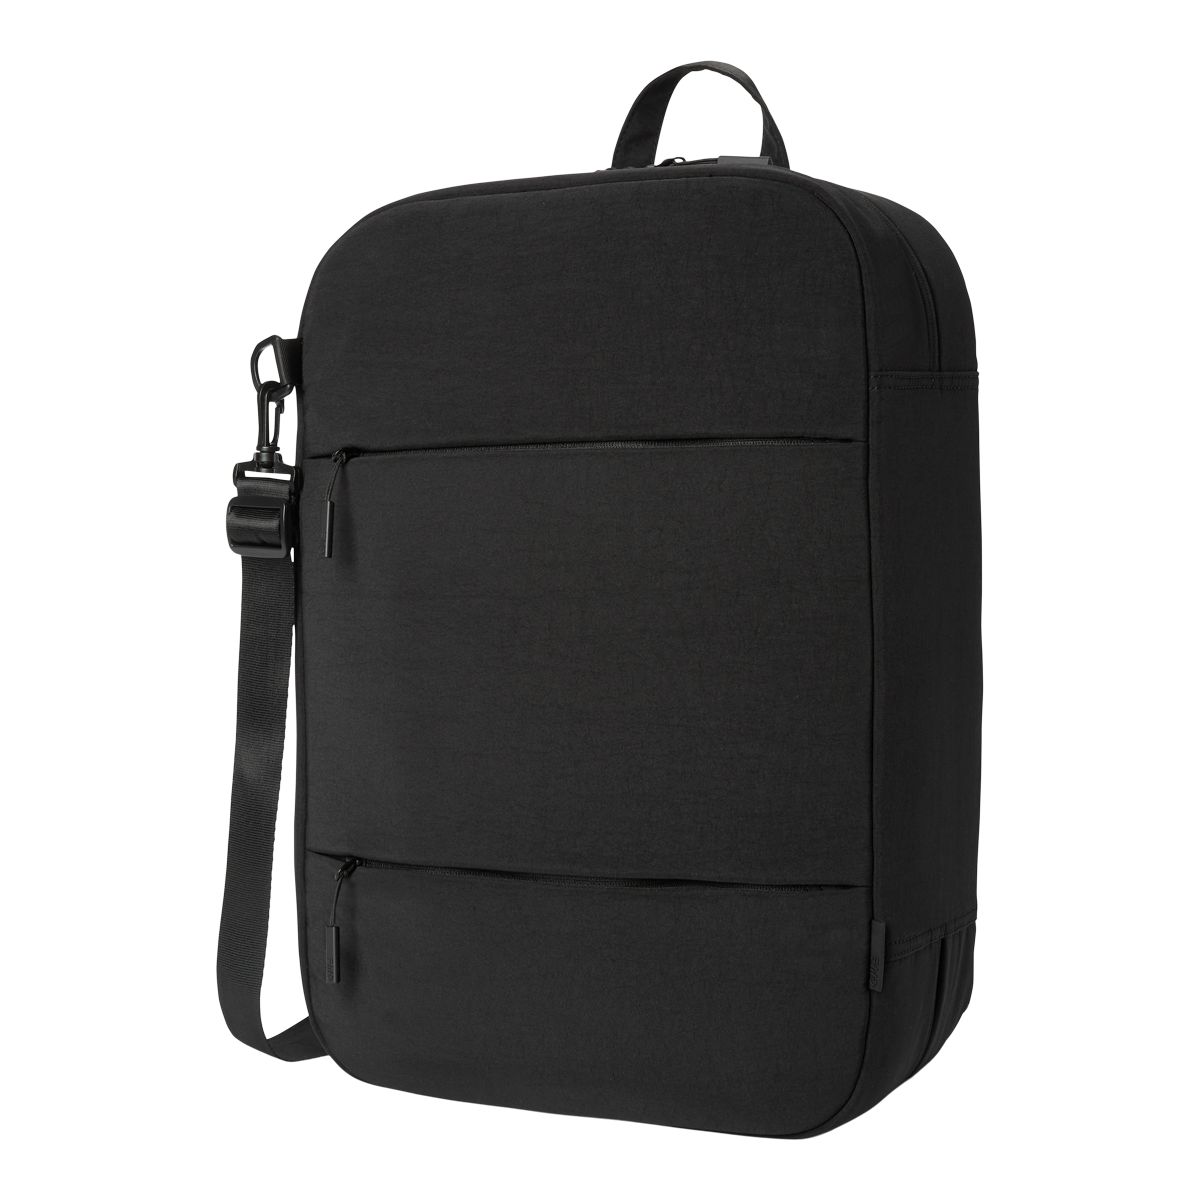 FWD Onthego Convert Travel Backpack